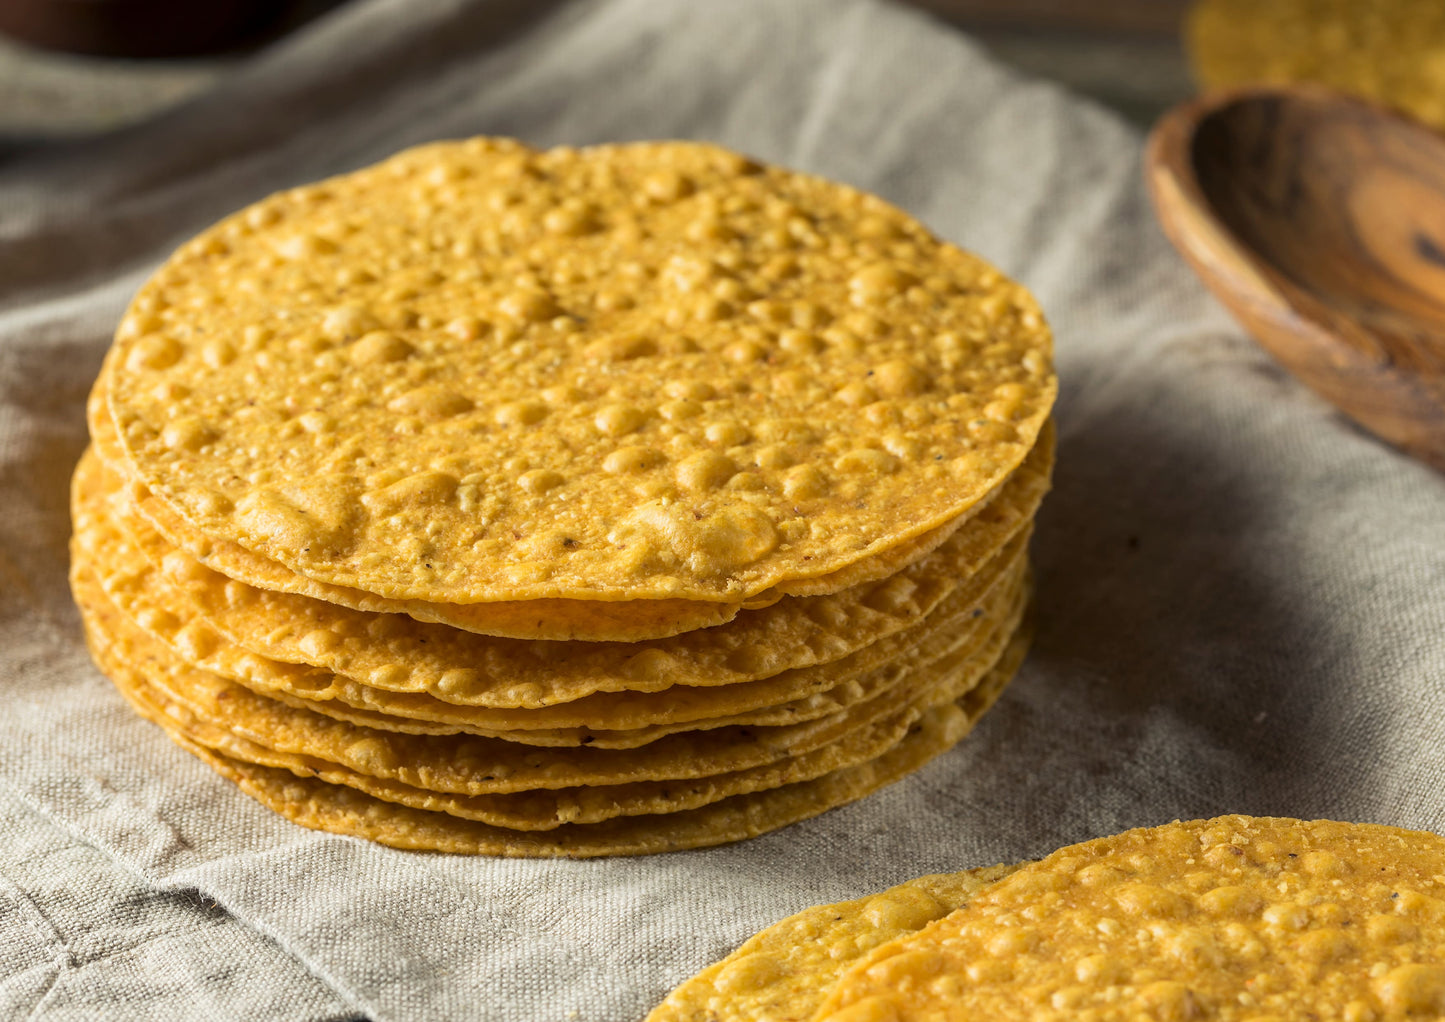 Organic Corn Flour - Non-GMO, Whole Grain, Finely Ground Meal, Vegan, Kosher, Bulk Yellow Milled Maize. Great for Cooking and Baking Cornbread, Pancakes, and Tortillas. Made in USA